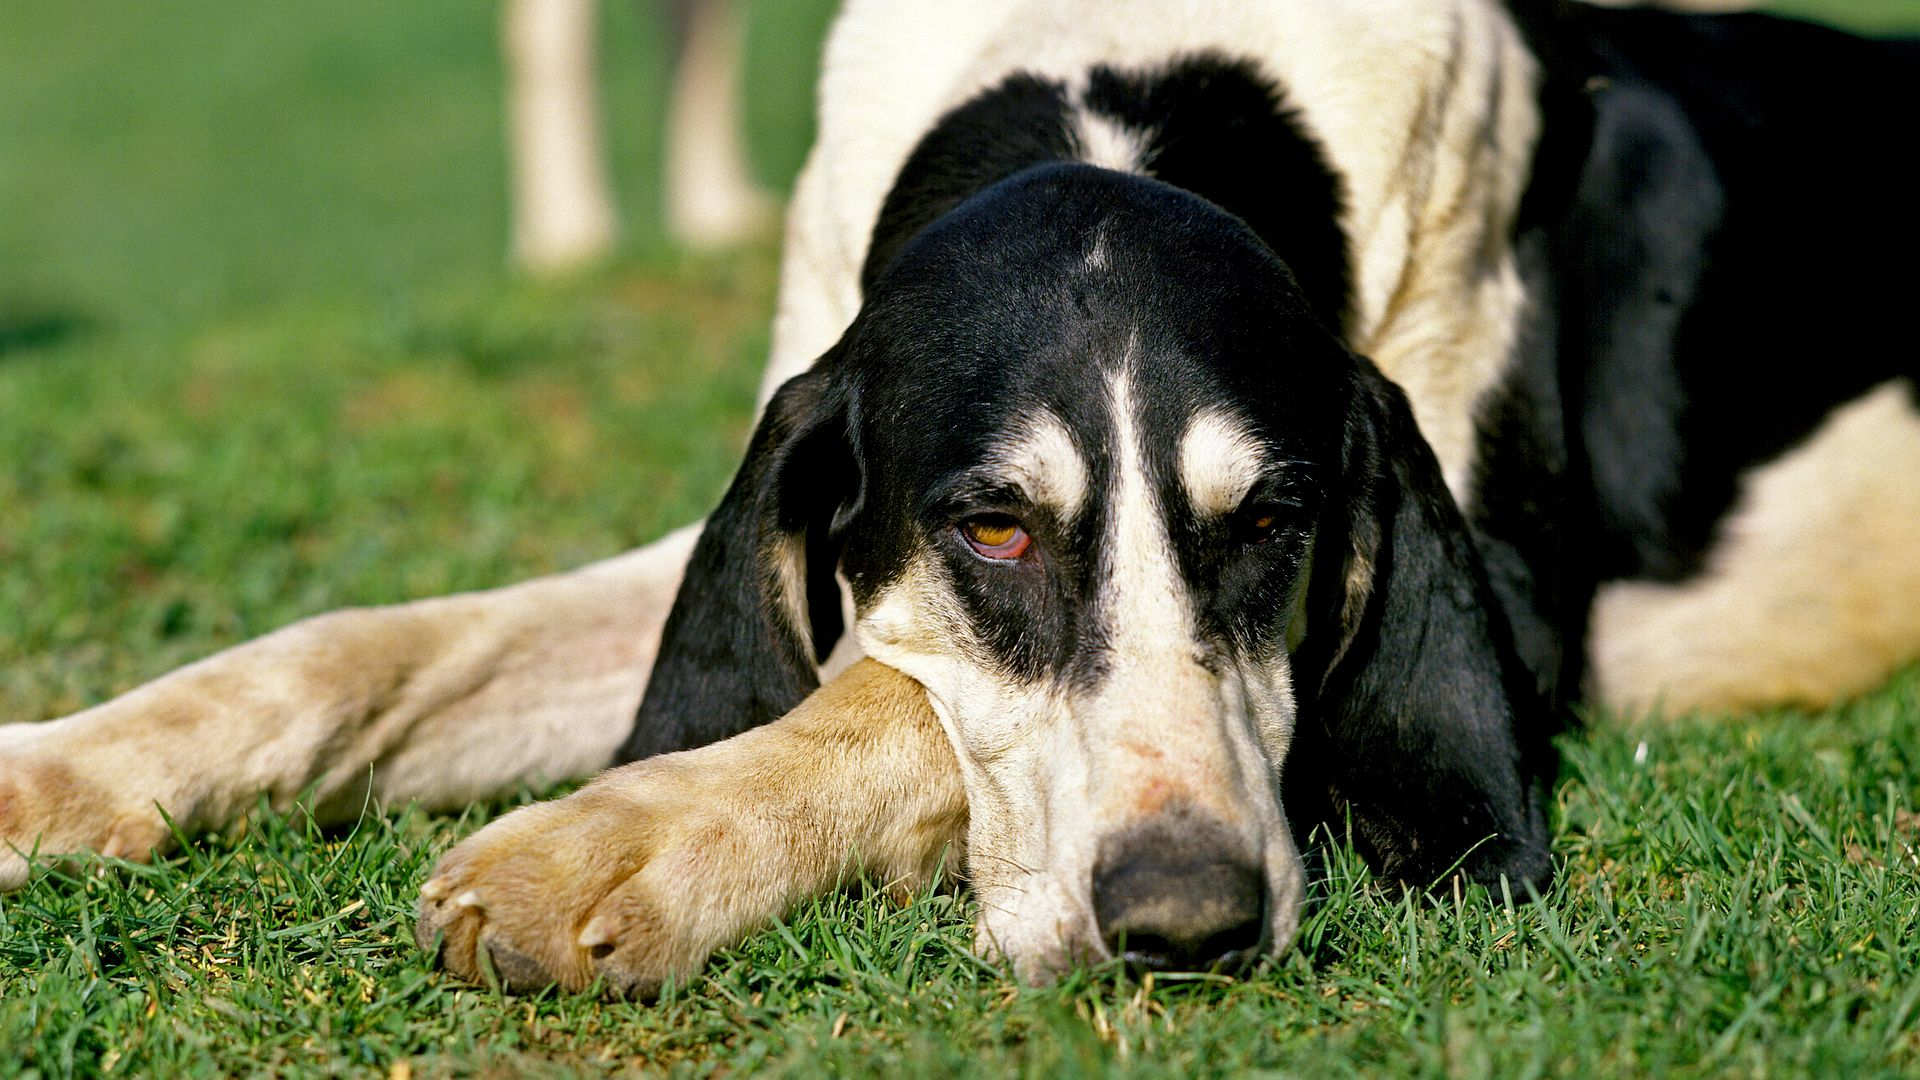 Great Anglo Francais Black and White Hound laying on grass, head resting on paw